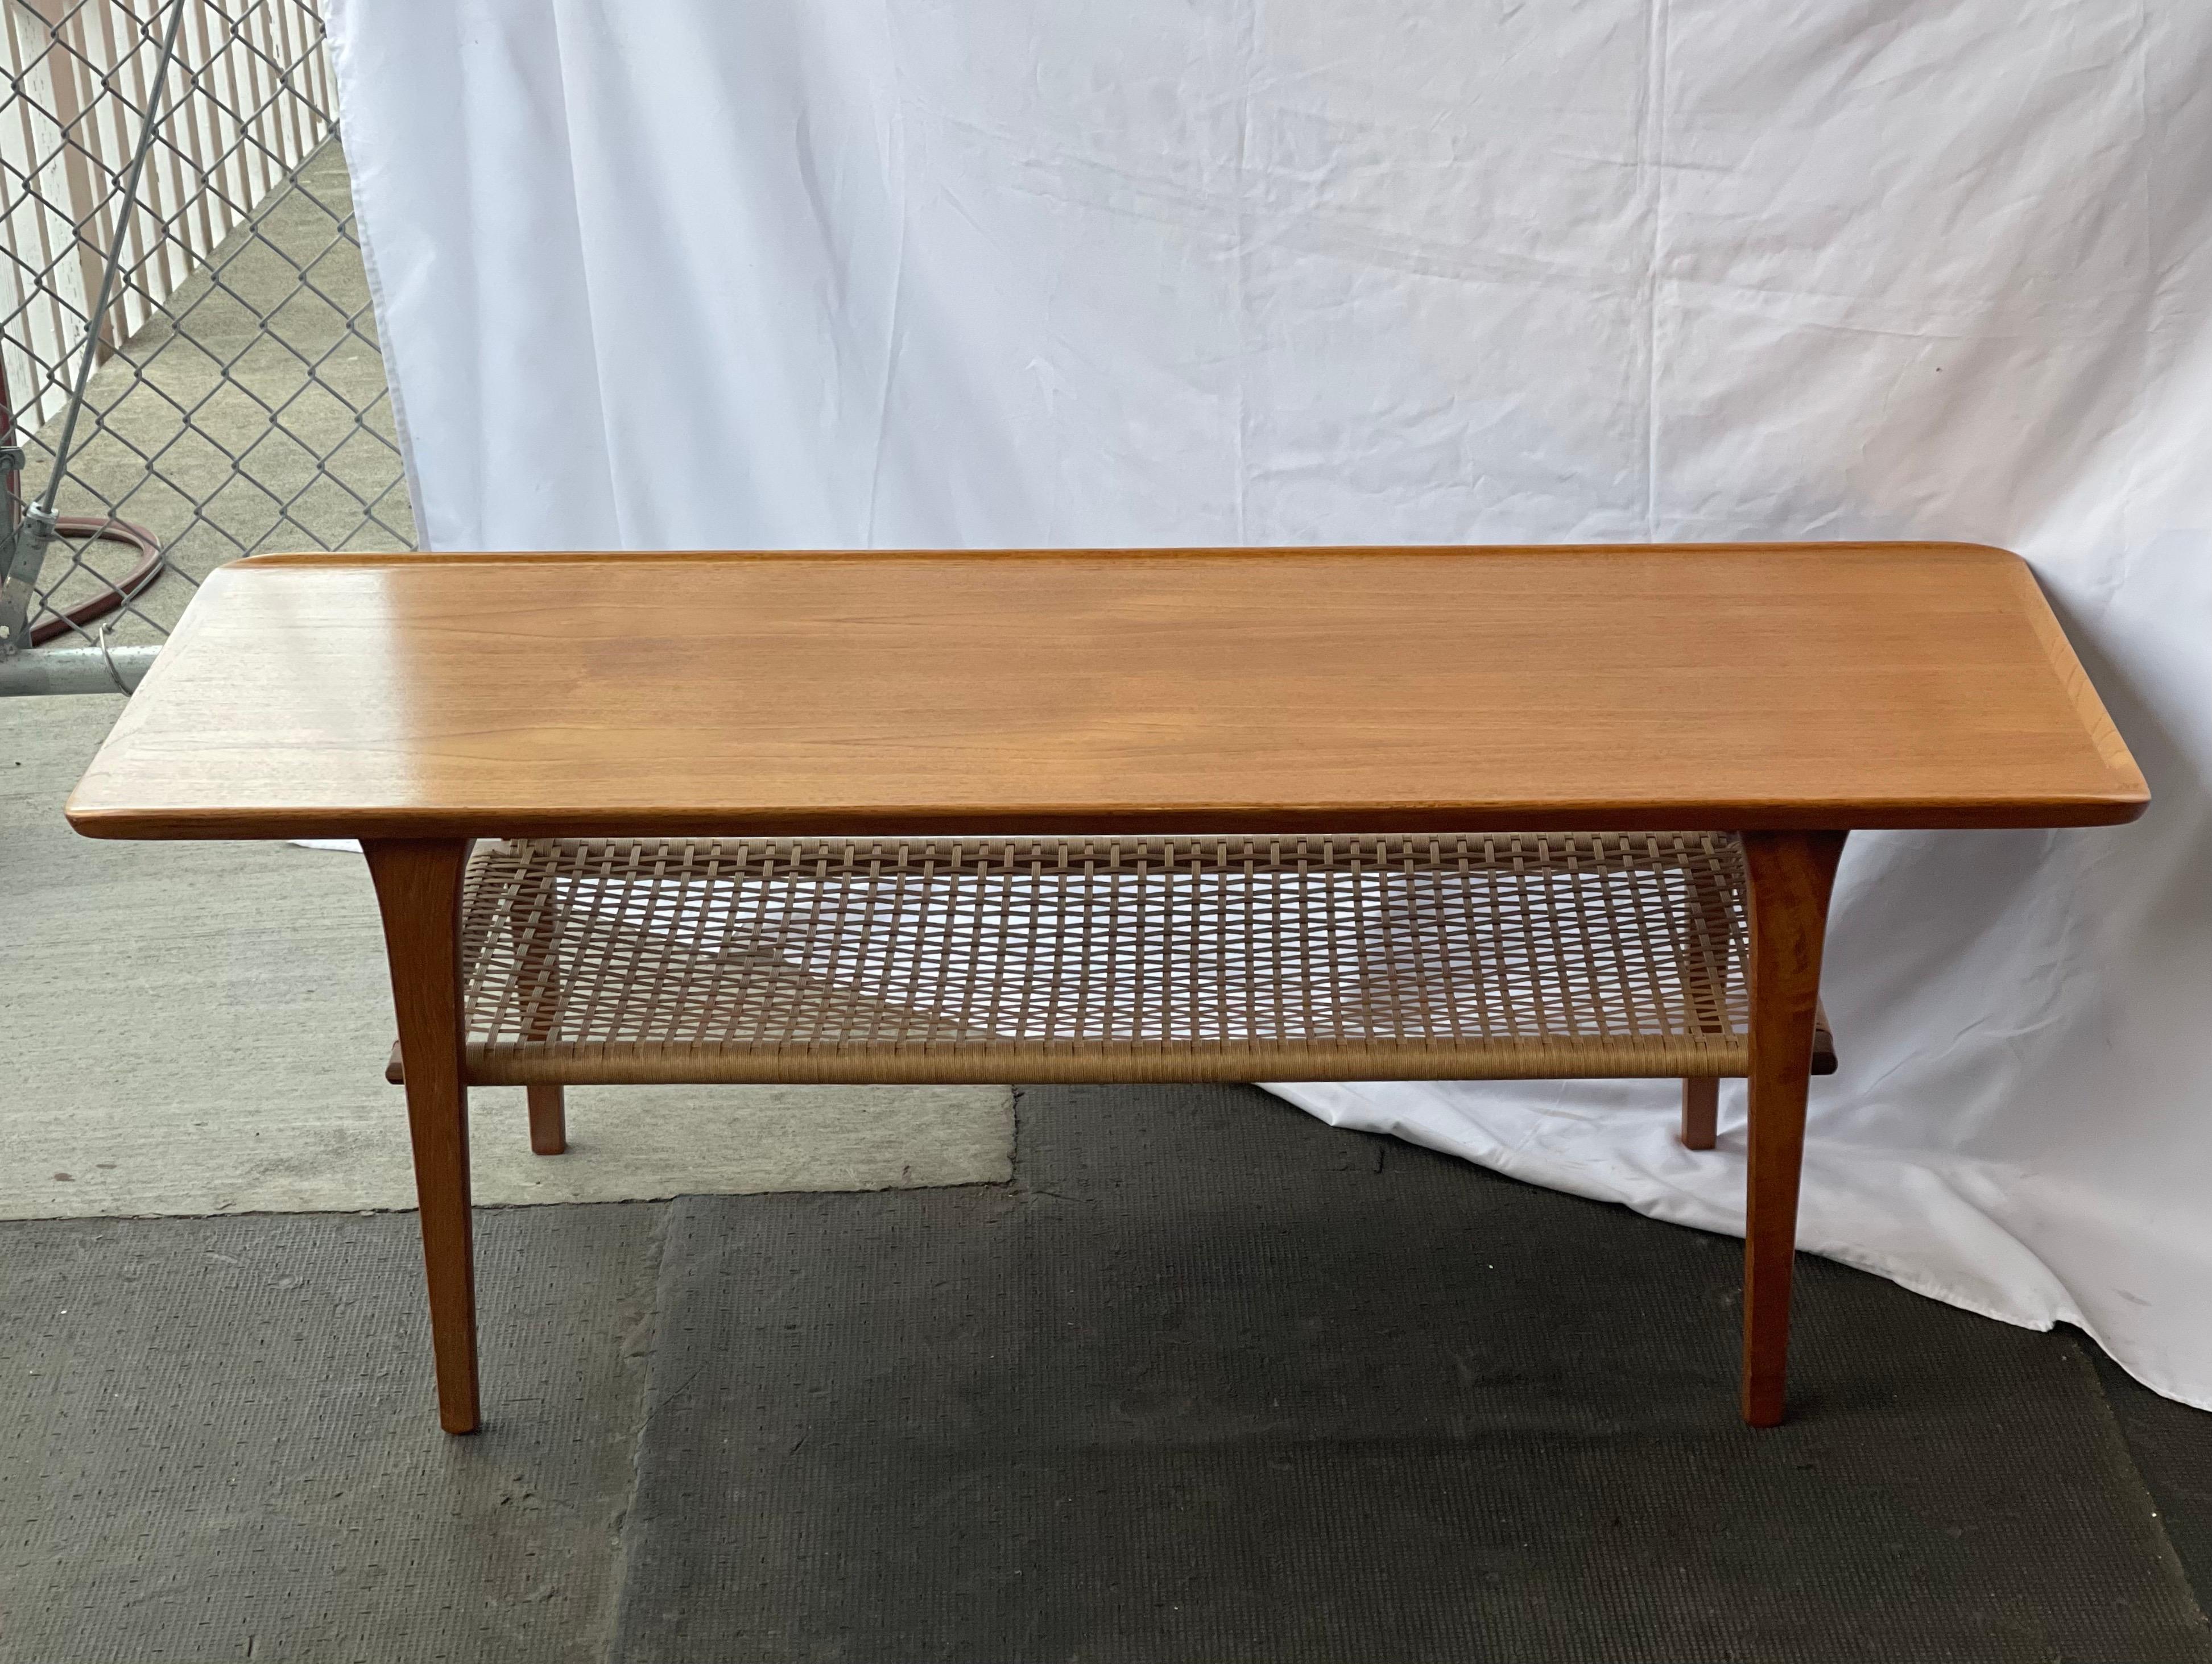 A beautiful solid teak mid century modern coffee table with rattan shelf. A classic design and perfect addition to any space.